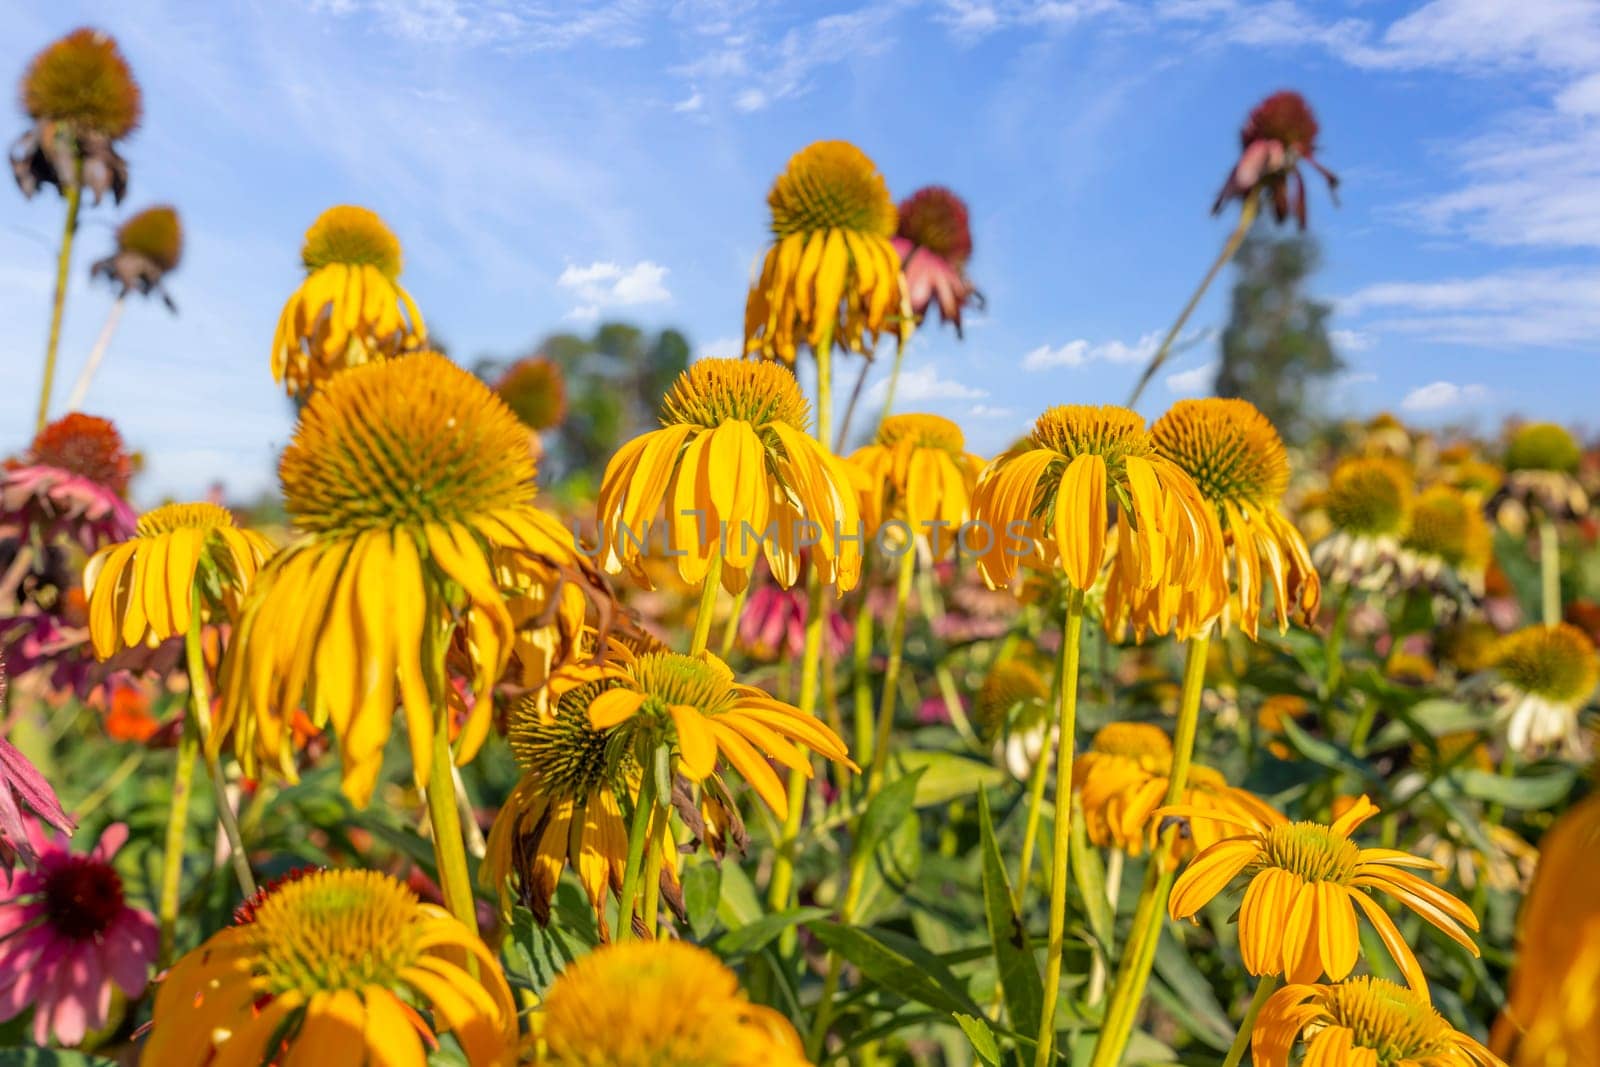 Yellow flowers of Echinacea purpurea 'Sombrero Yellow', in close up, in a natural outdoor setting. Cone flower.